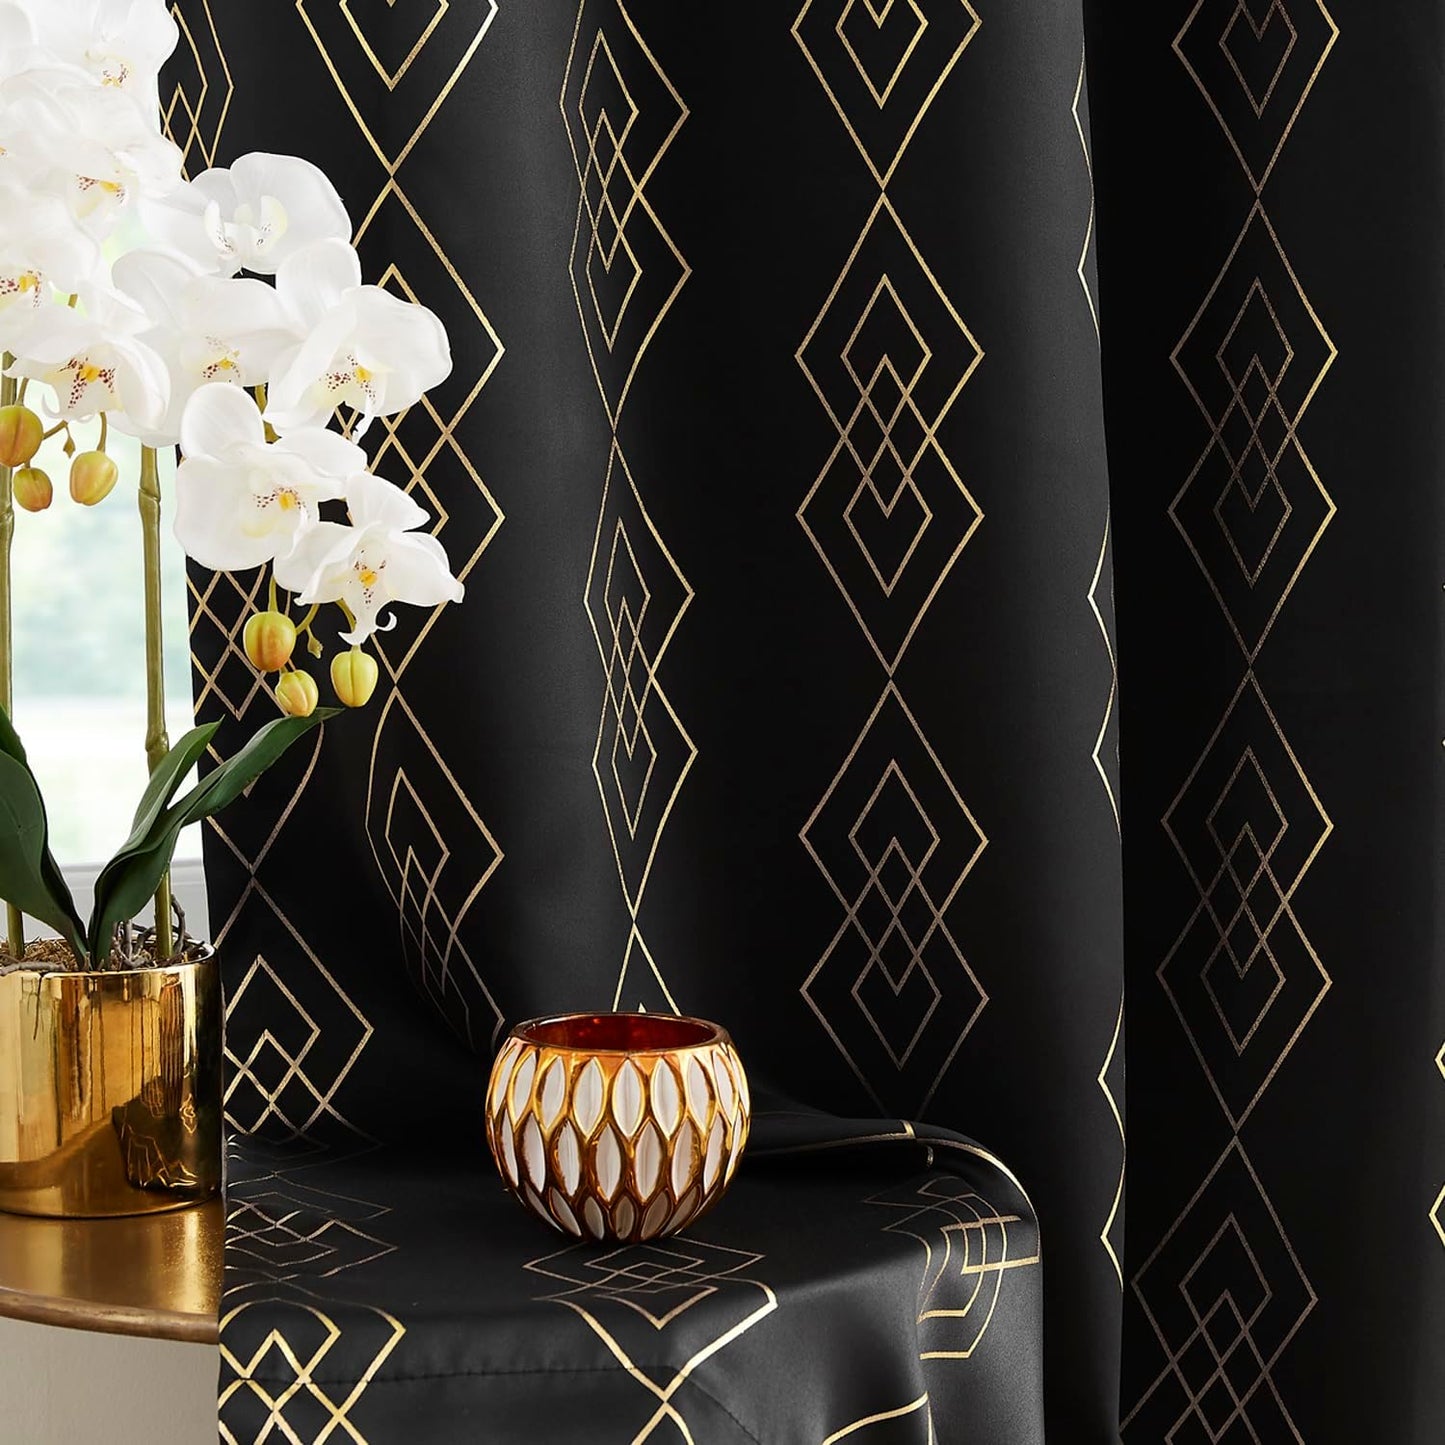 Metallic Geo Blackout Curtain Panels for Bedroom Thermal Insulated Light Blocking Foil Trellis Moroccan Window Treatments Diamond Grommet Drapes for Living-Room, Set of 2, 50" X 84", Beige/Gold  ugoutry Geometric Black 50"X63"X2 